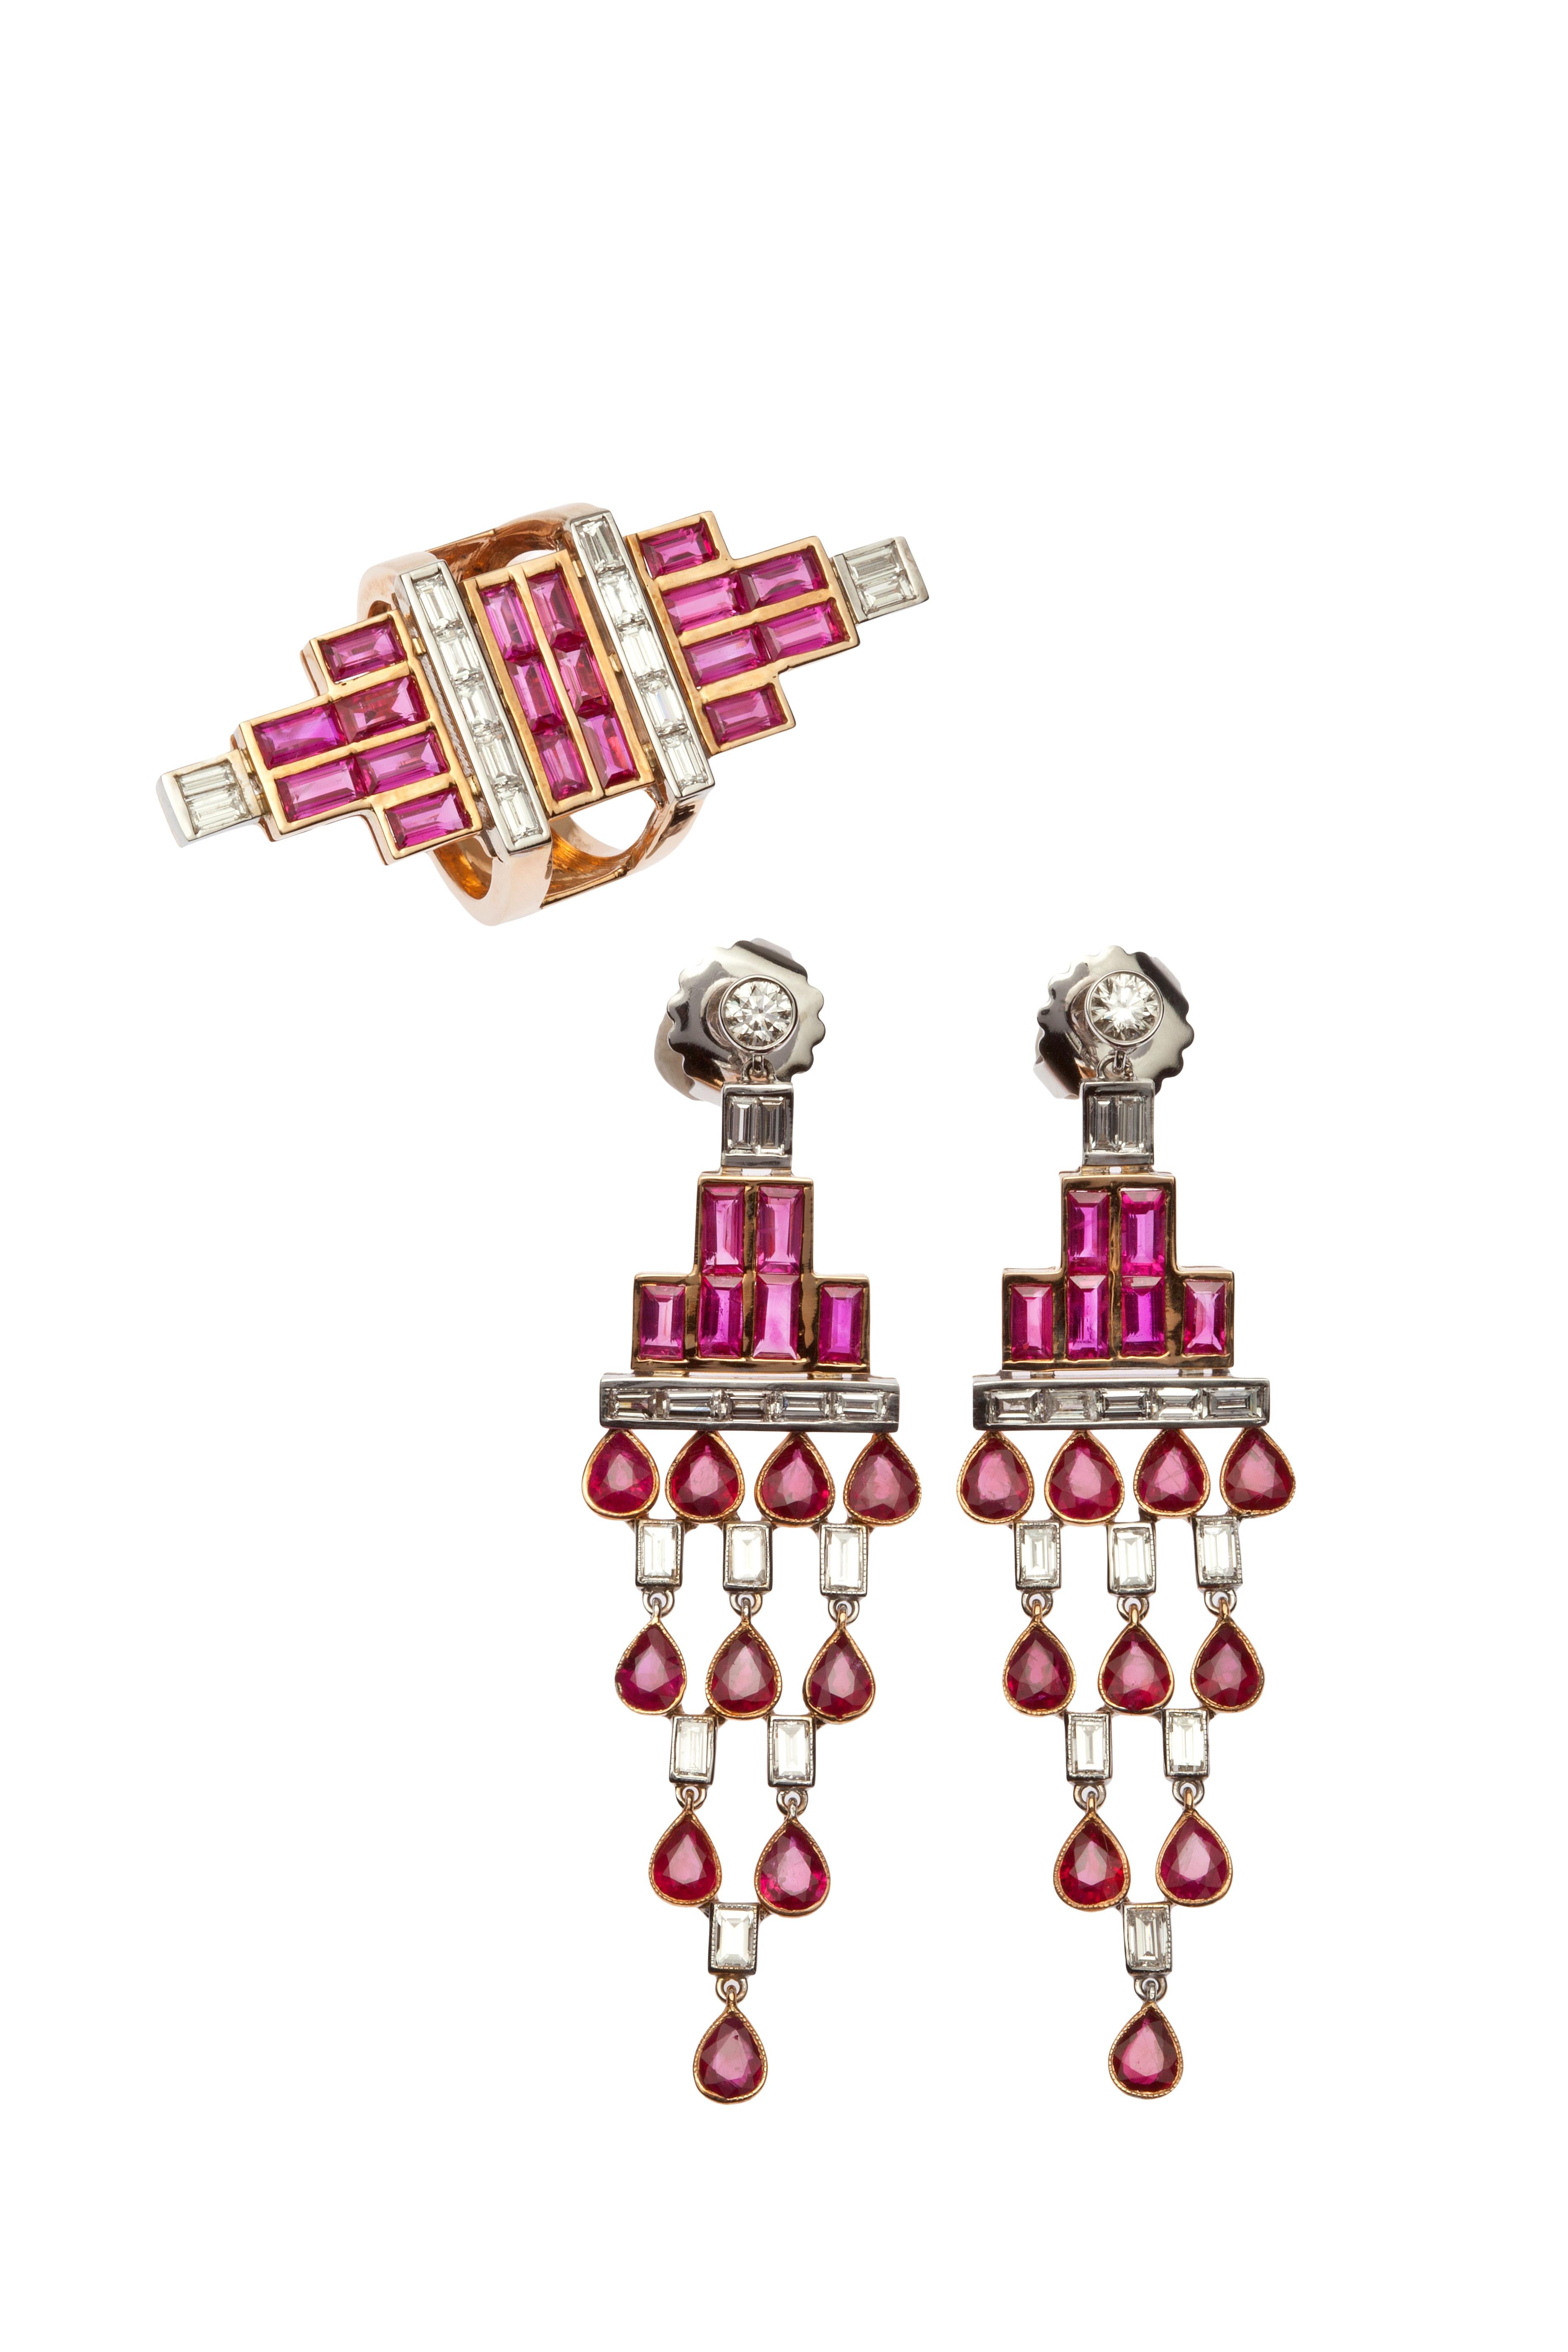 Rose Gold White Gold Baguette Diamonds, Baguette Ruby and Pear Shaped Ruby Art Deco  Earrings


2,36 Carat Baguette Diamond
7,63 Carat  Pear Shaped Ruby 
3,38 Carat Baguette Ruby
0,48 Carat  Round Diamonds
